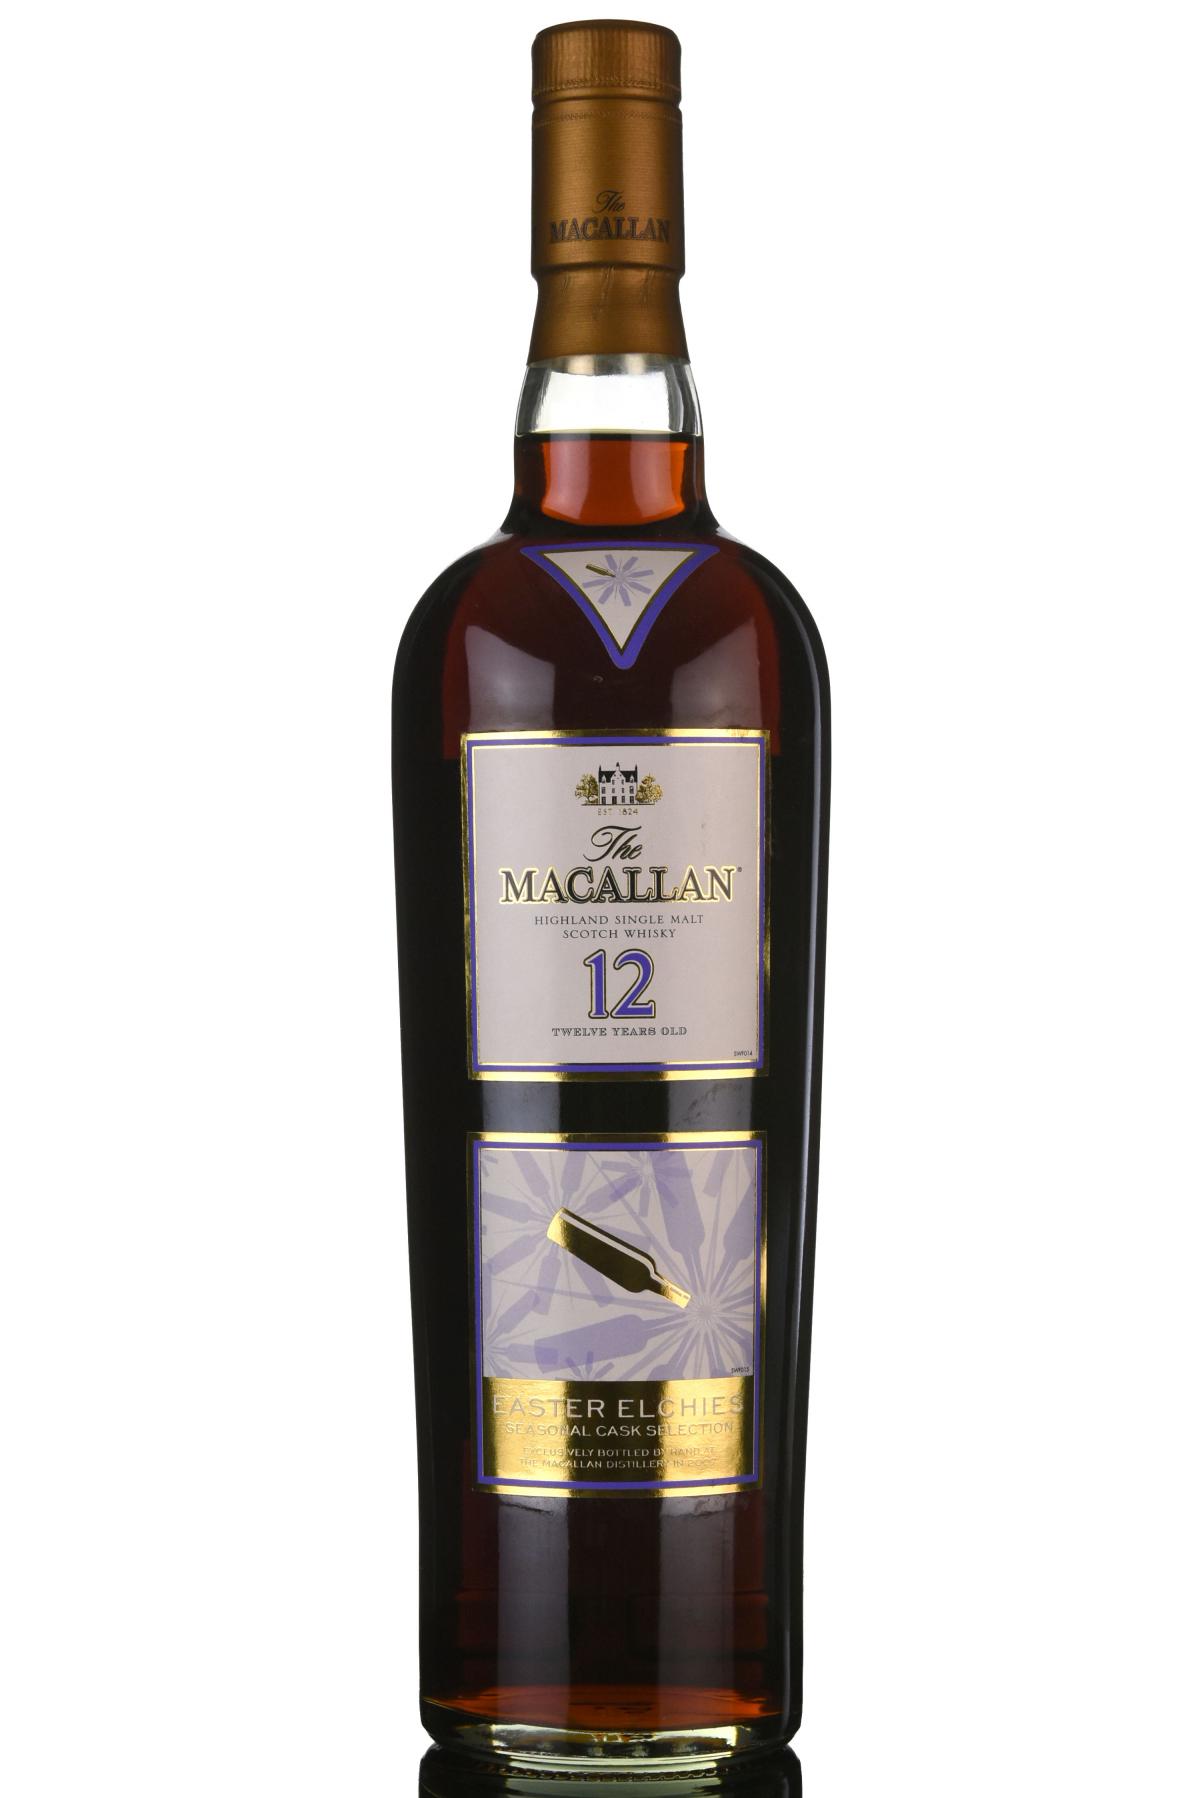 Macallan 12 Year Old - Easter Elchies